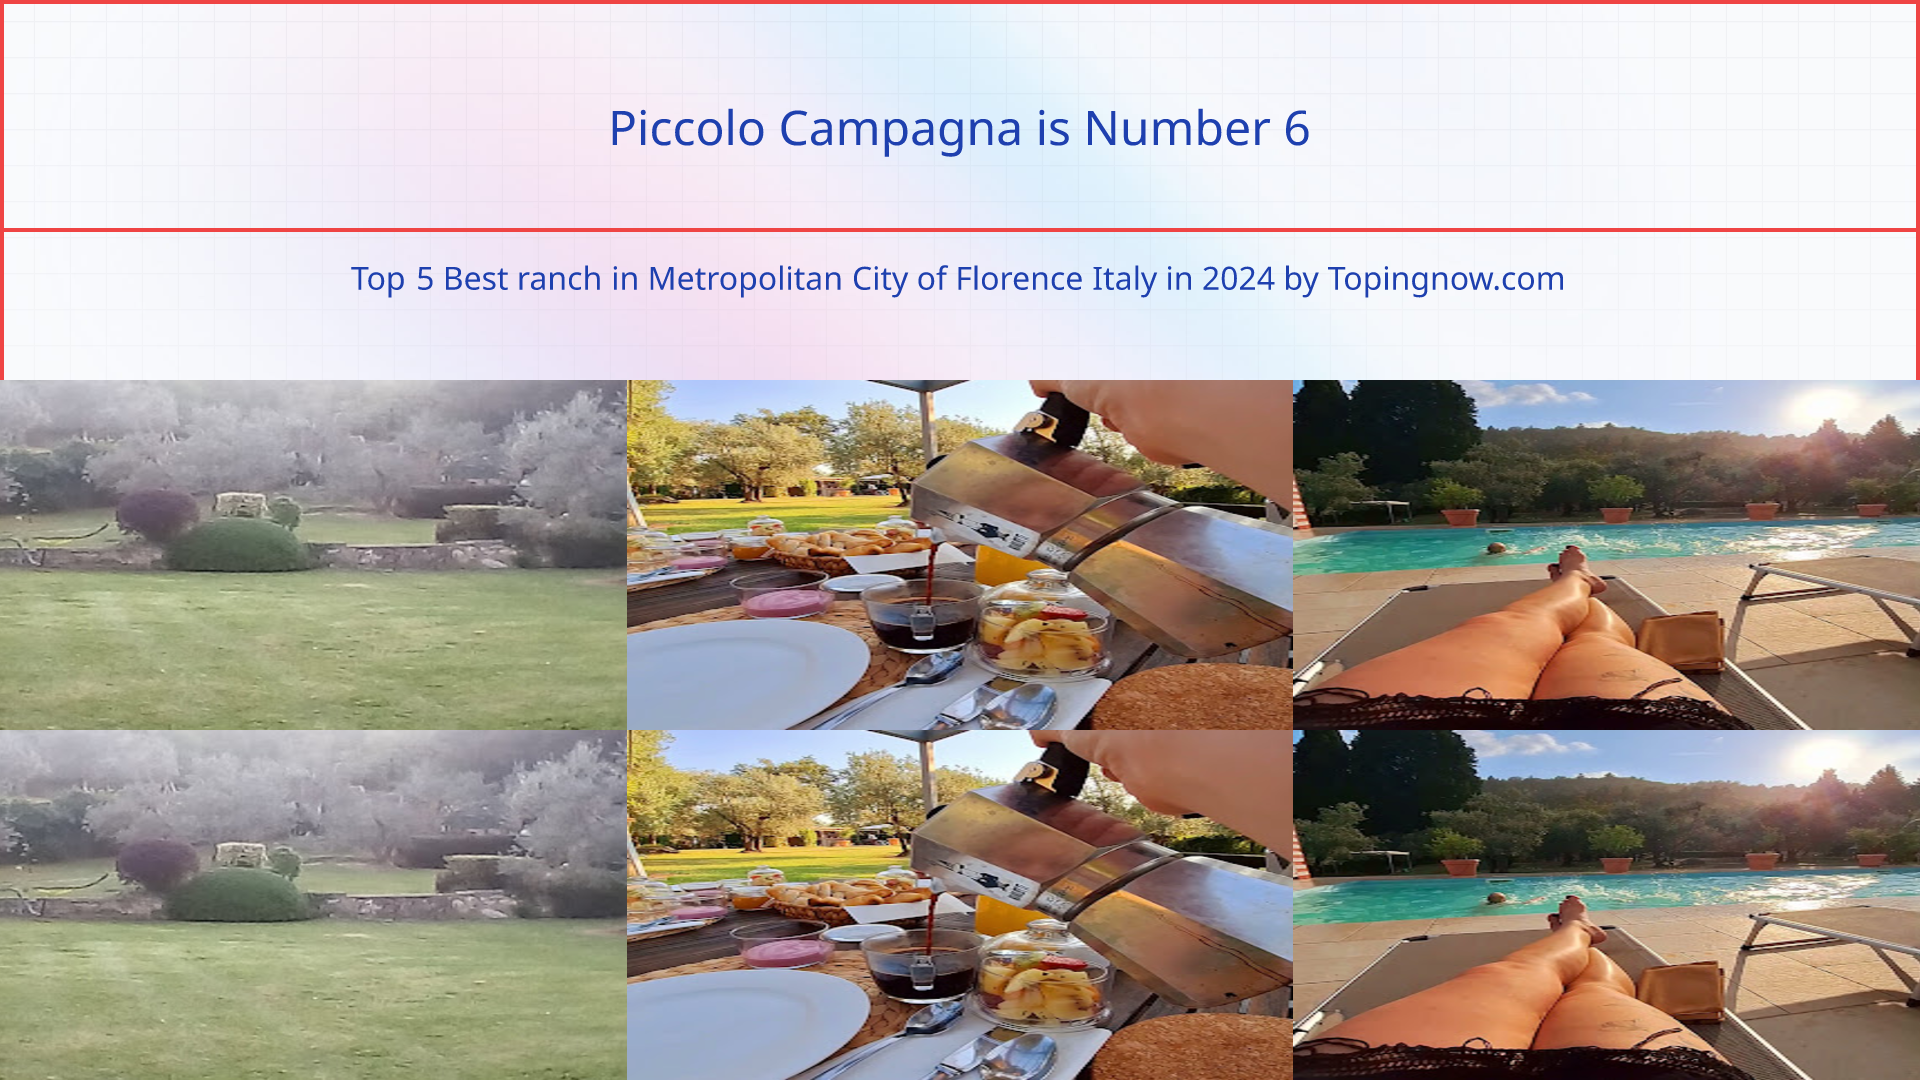 Piccolo Campagna: Top 5 Best ranch in Metropolitan City of Florence Italy in 2024